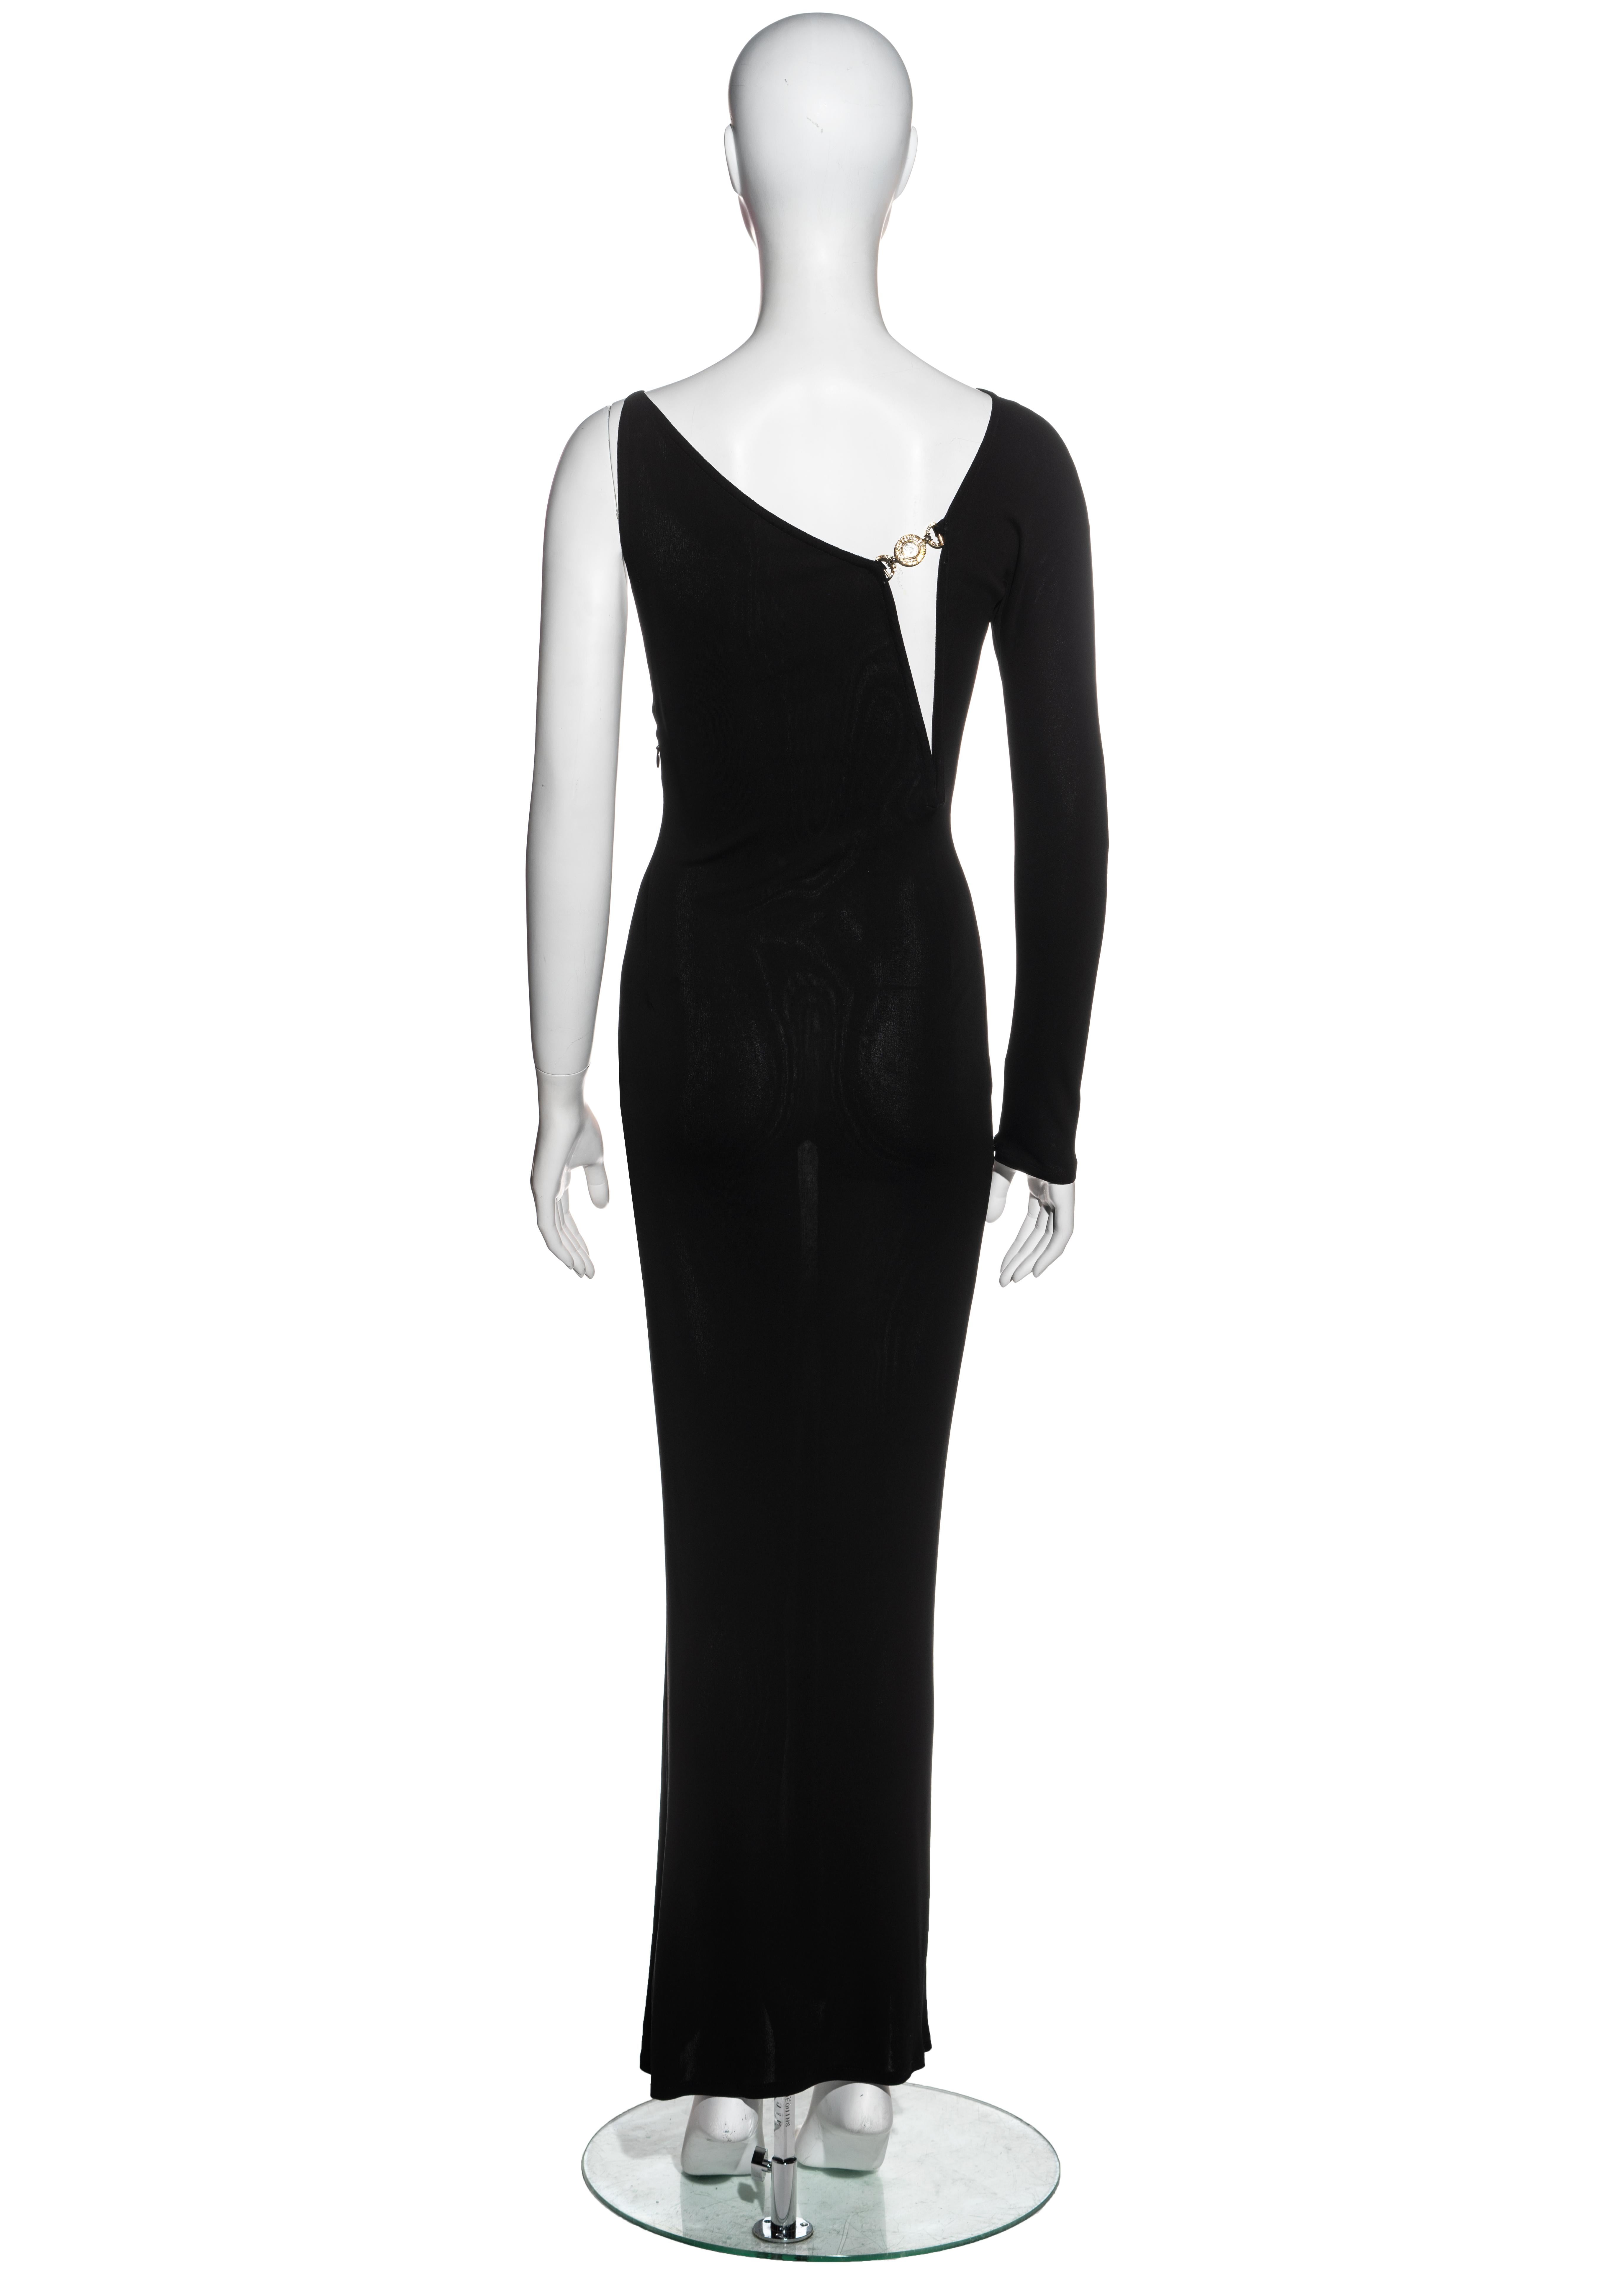 Gianni Versace black rayon one shoulder evening dress, 1996 For Sale 1